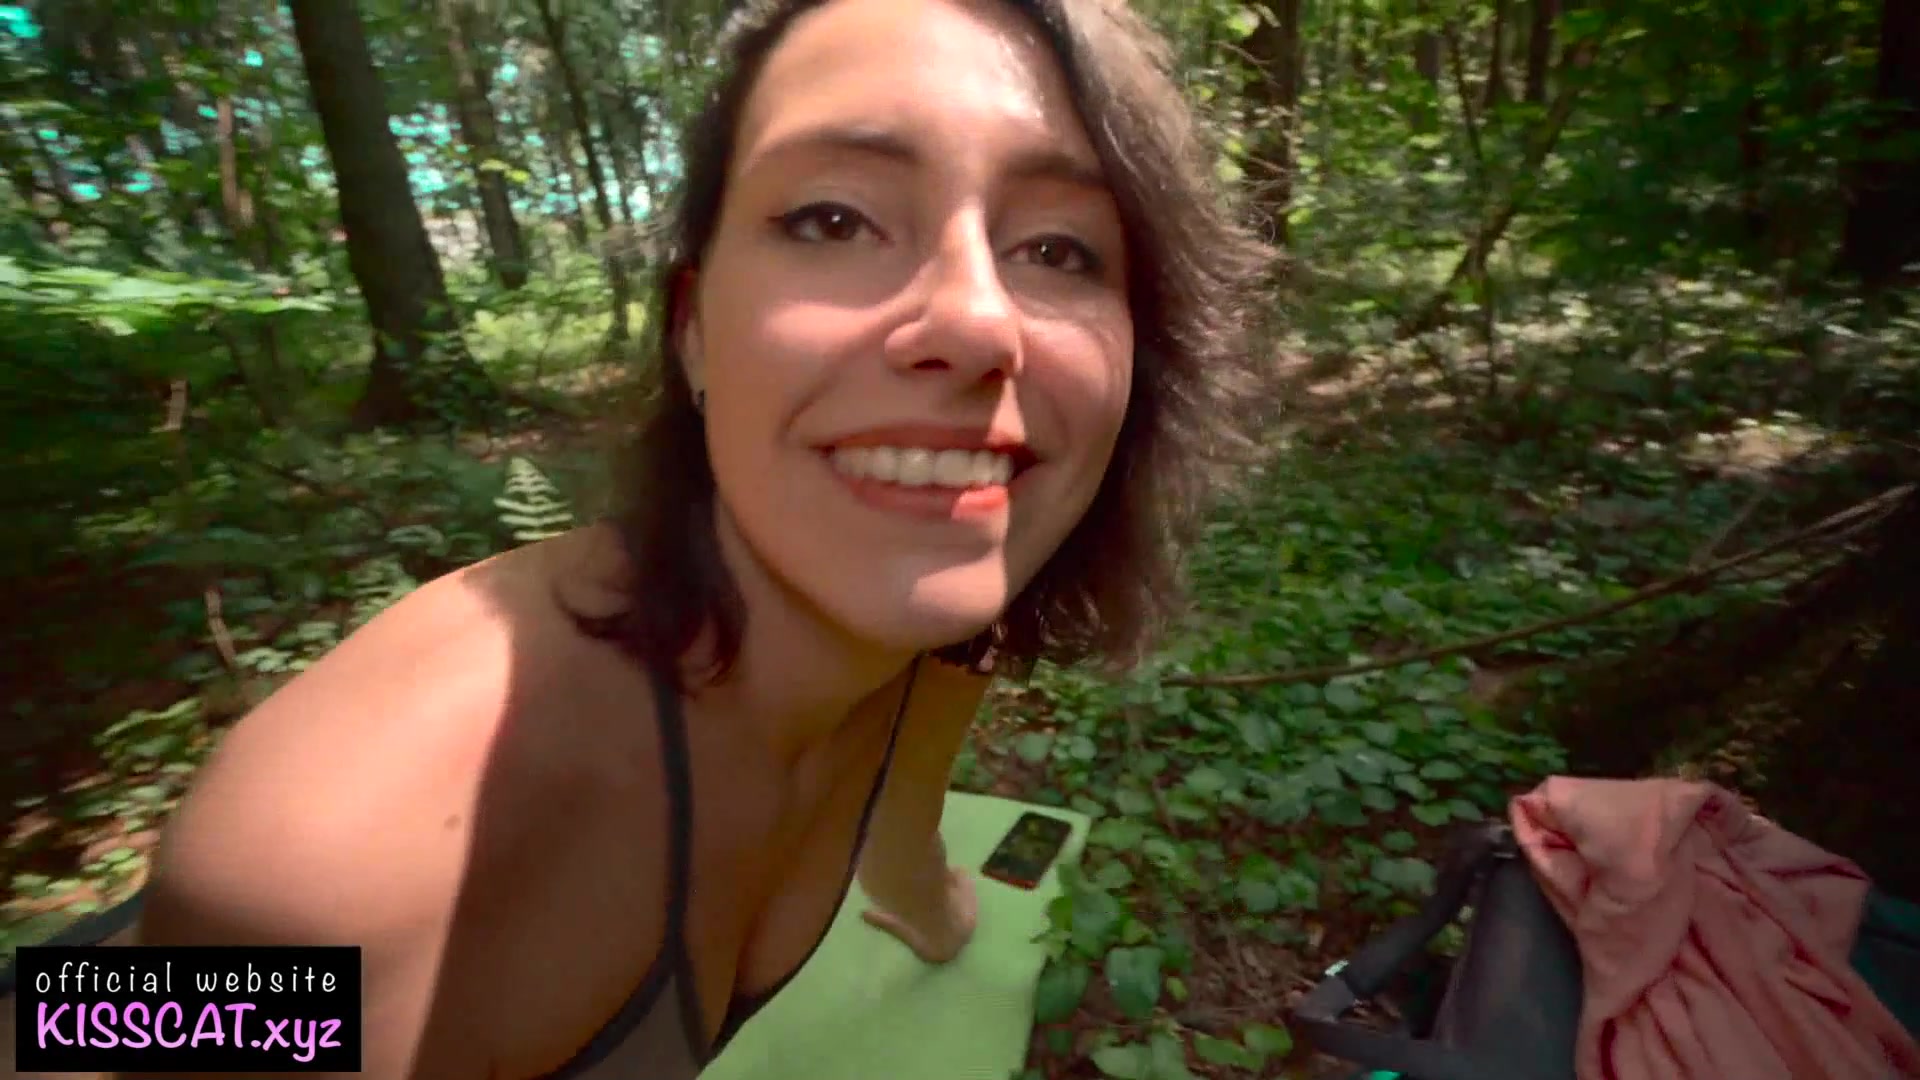 Fit sister fucks brother in public forest | FamilyPorn.tv